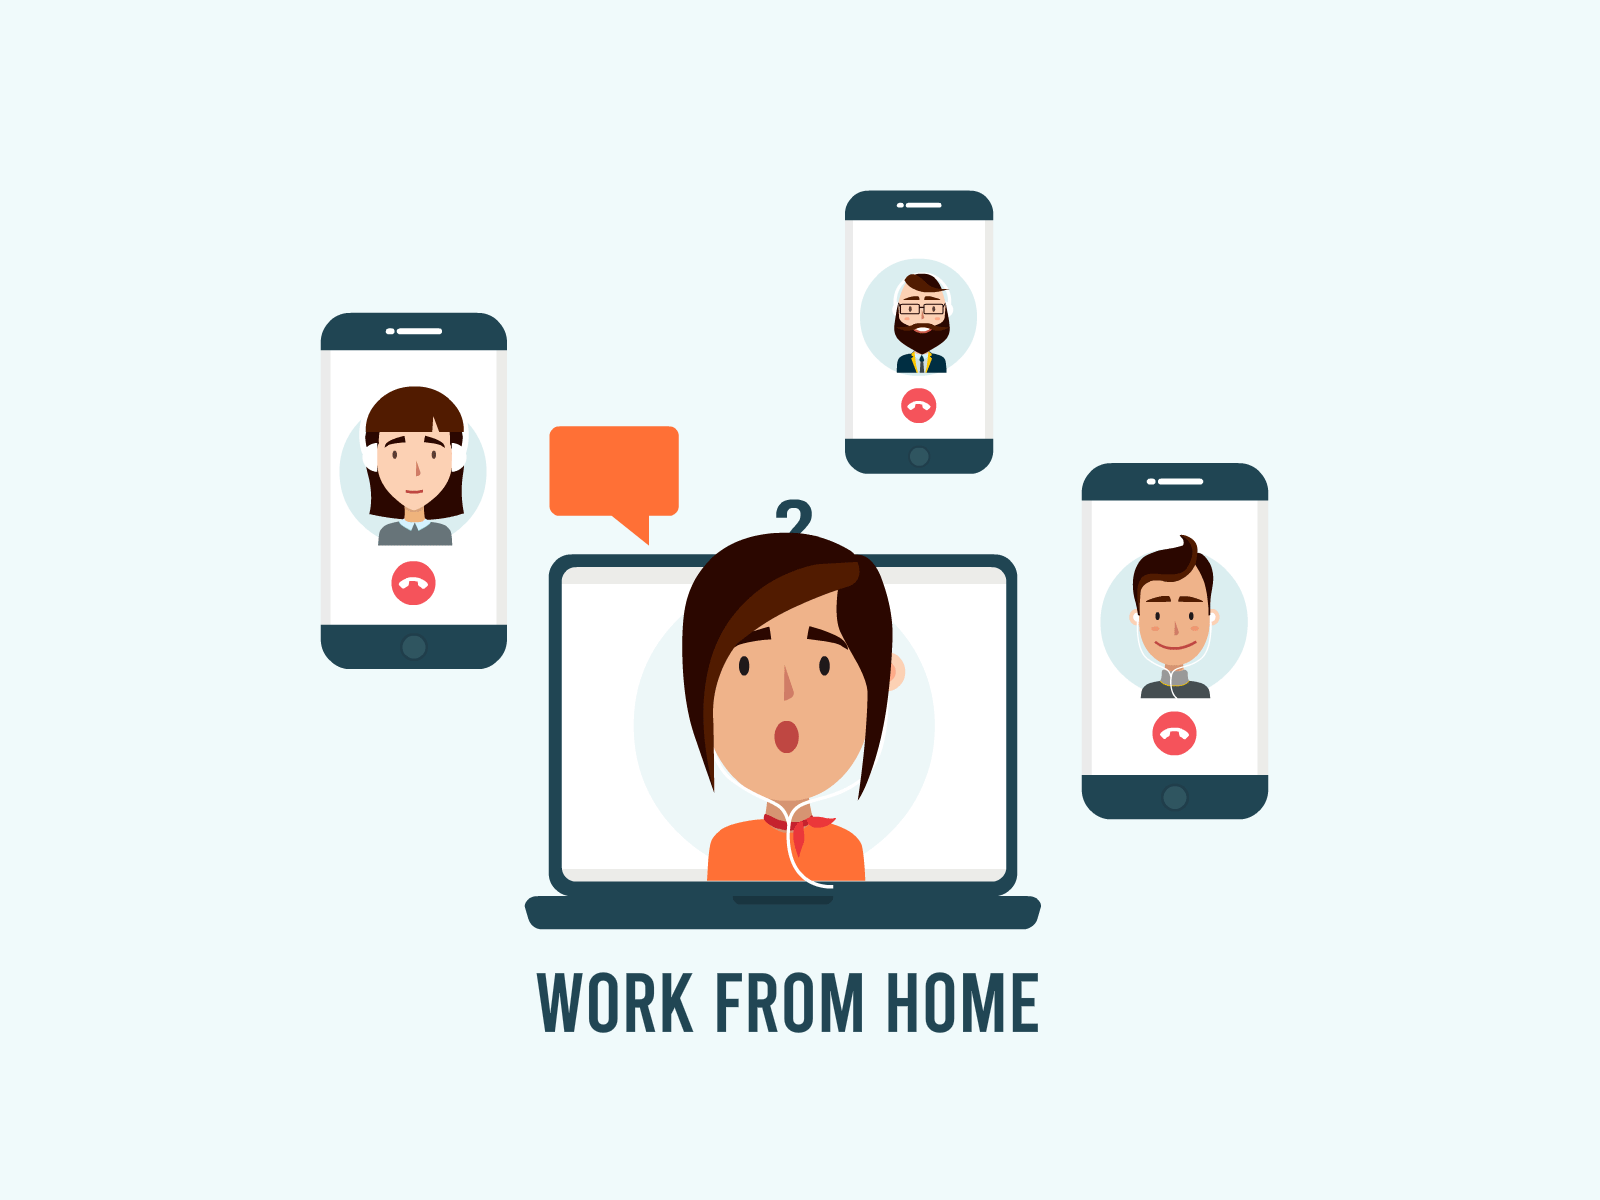 Video Call - Animated Gif by Panda Craft on Dribbble